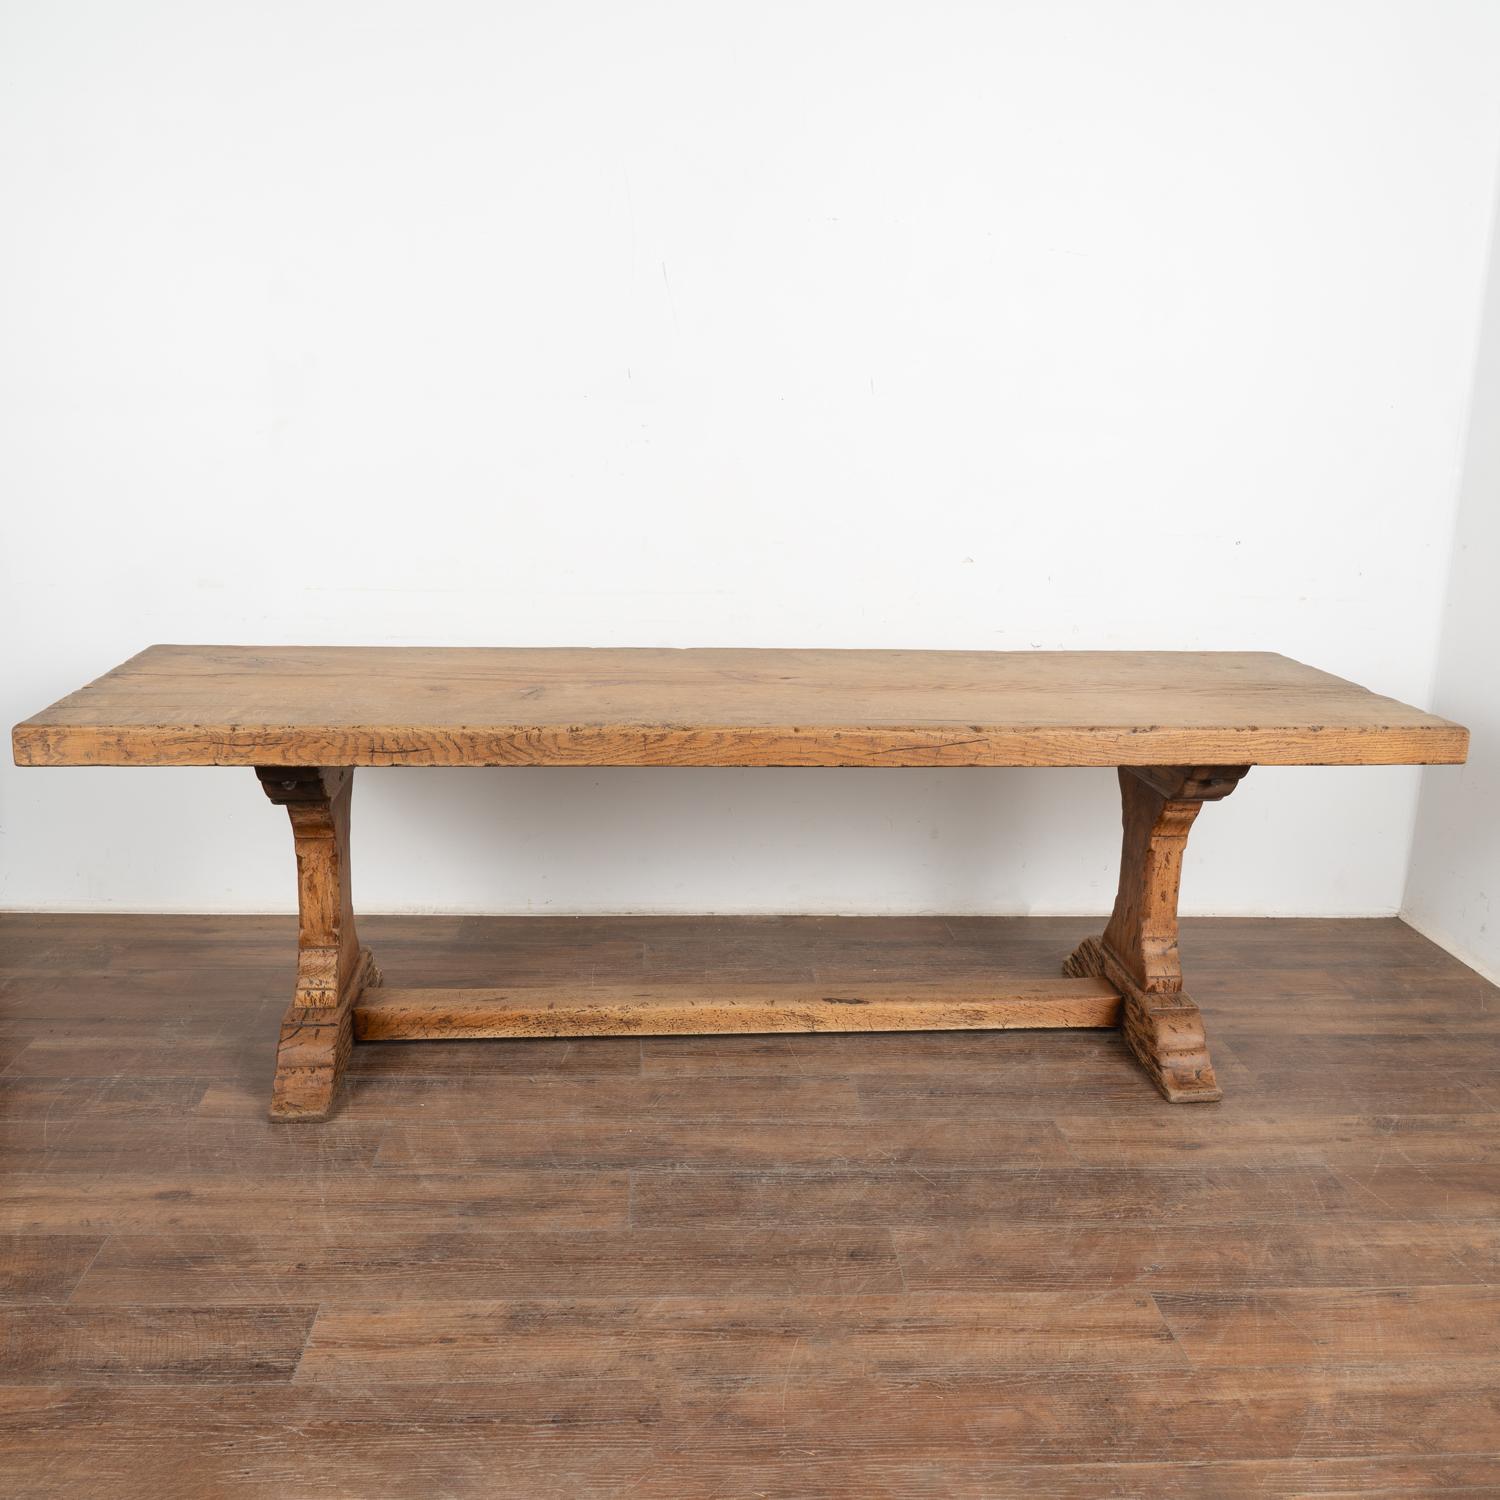 French Country Oak Dining Table, circa 1900-20 In Good Condition For Sale In Round Top, TX